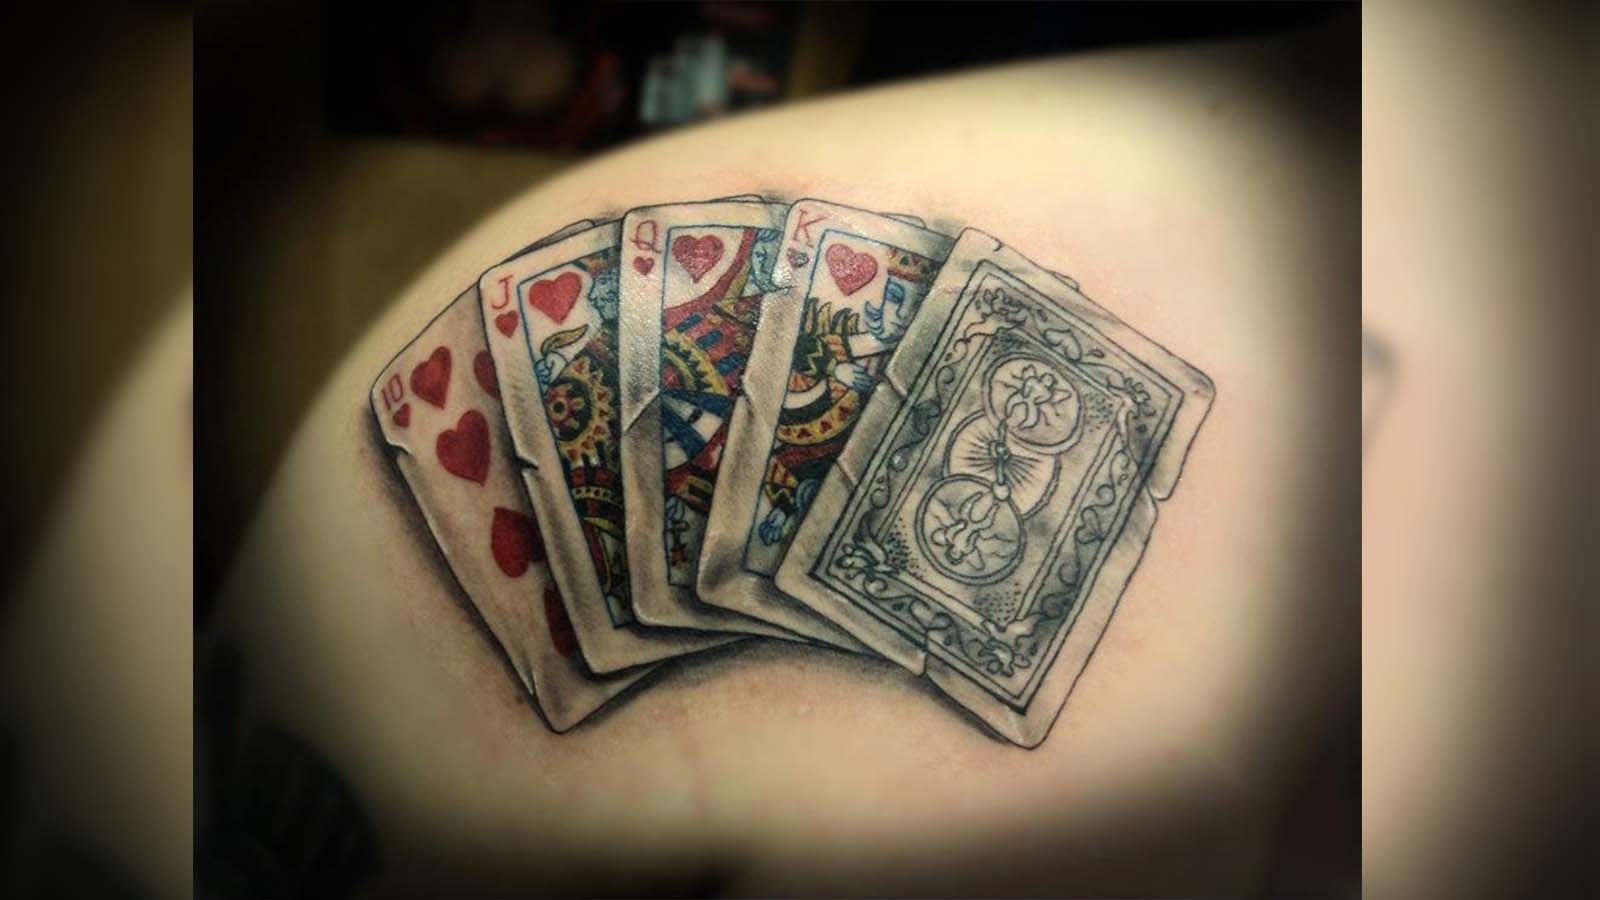 From Slot Symbols to Tattoos: Casino-Inspired Ink